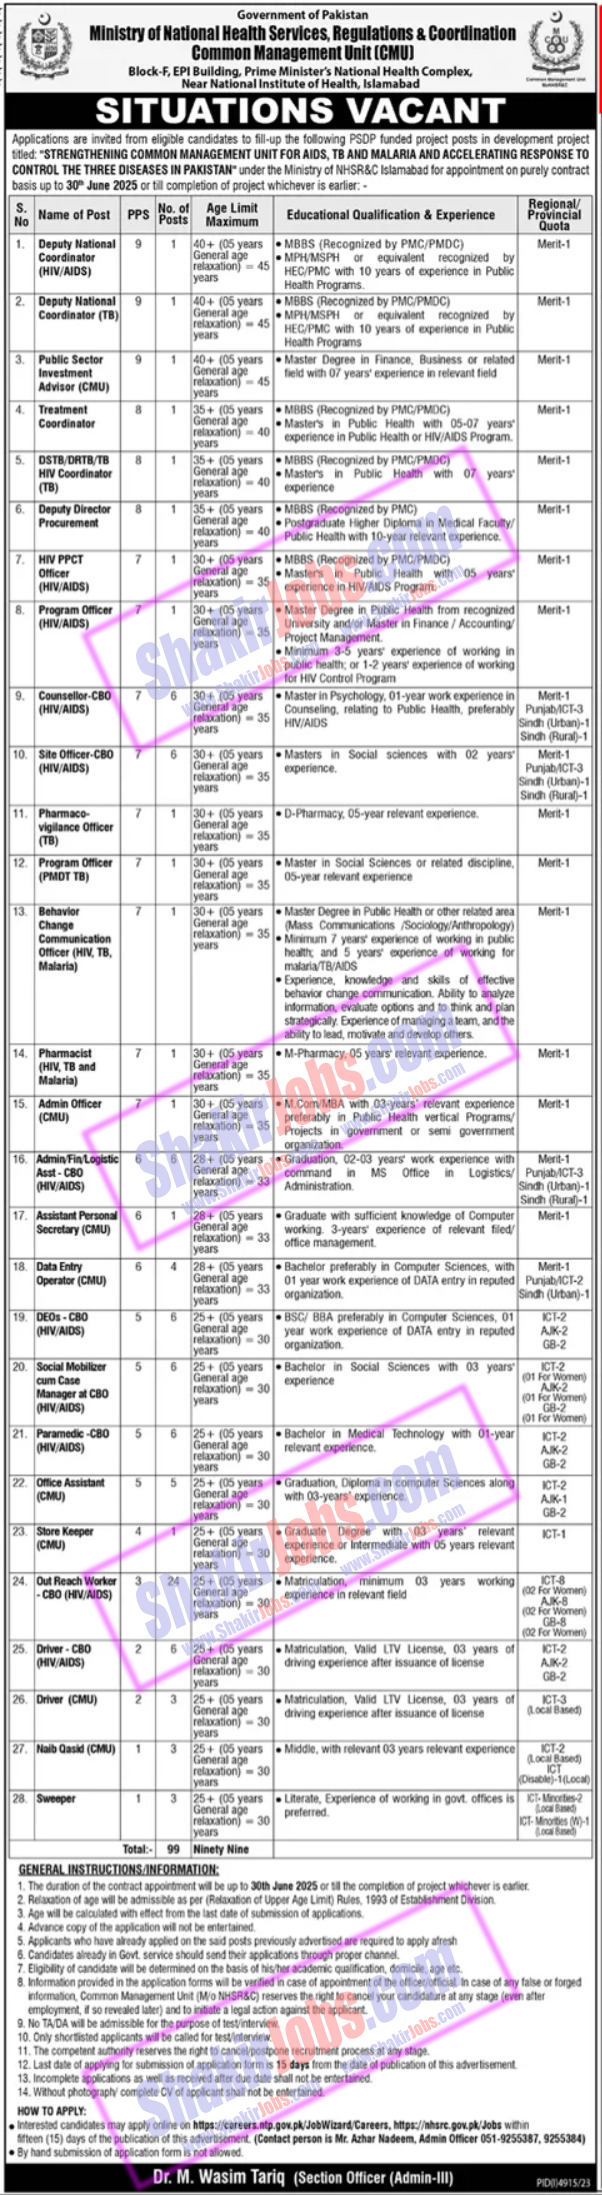 Ministry of National Health Services Jobs 2024